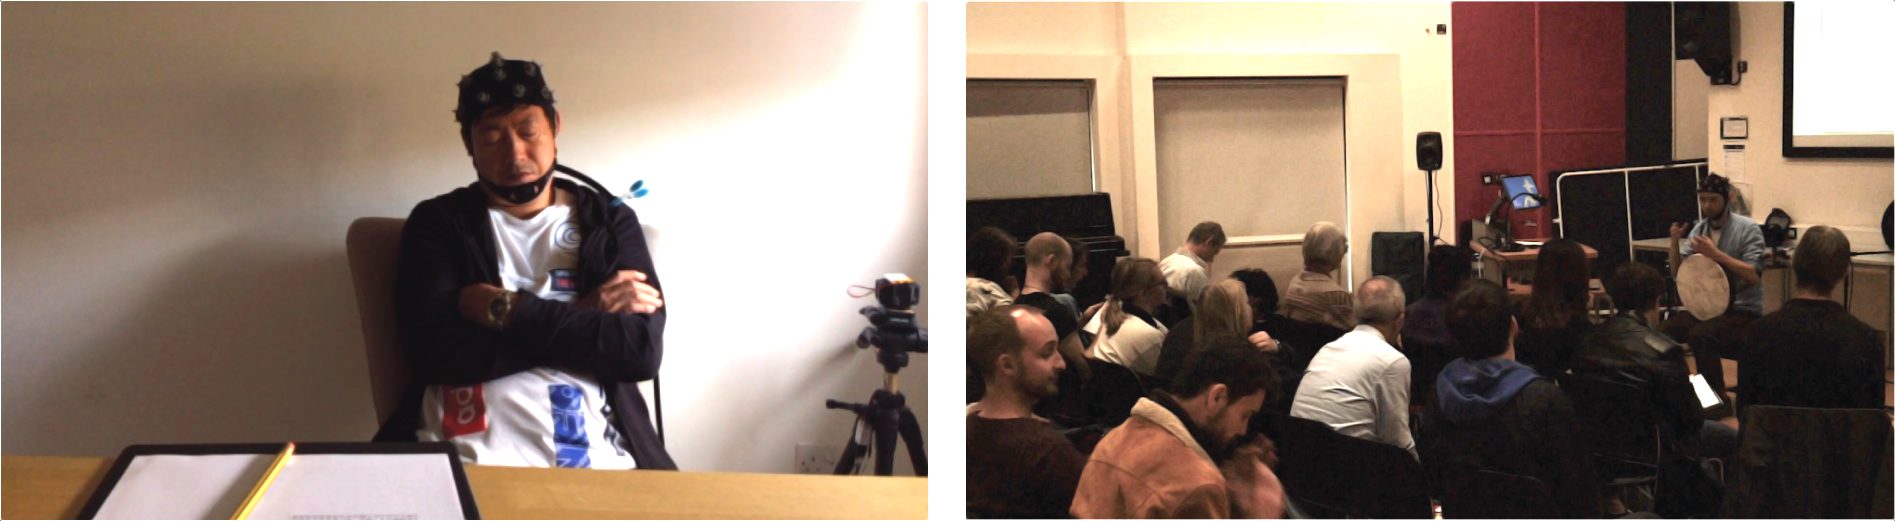 Photos contrasting the settings in the NFT (left) and the performance (right) settings.